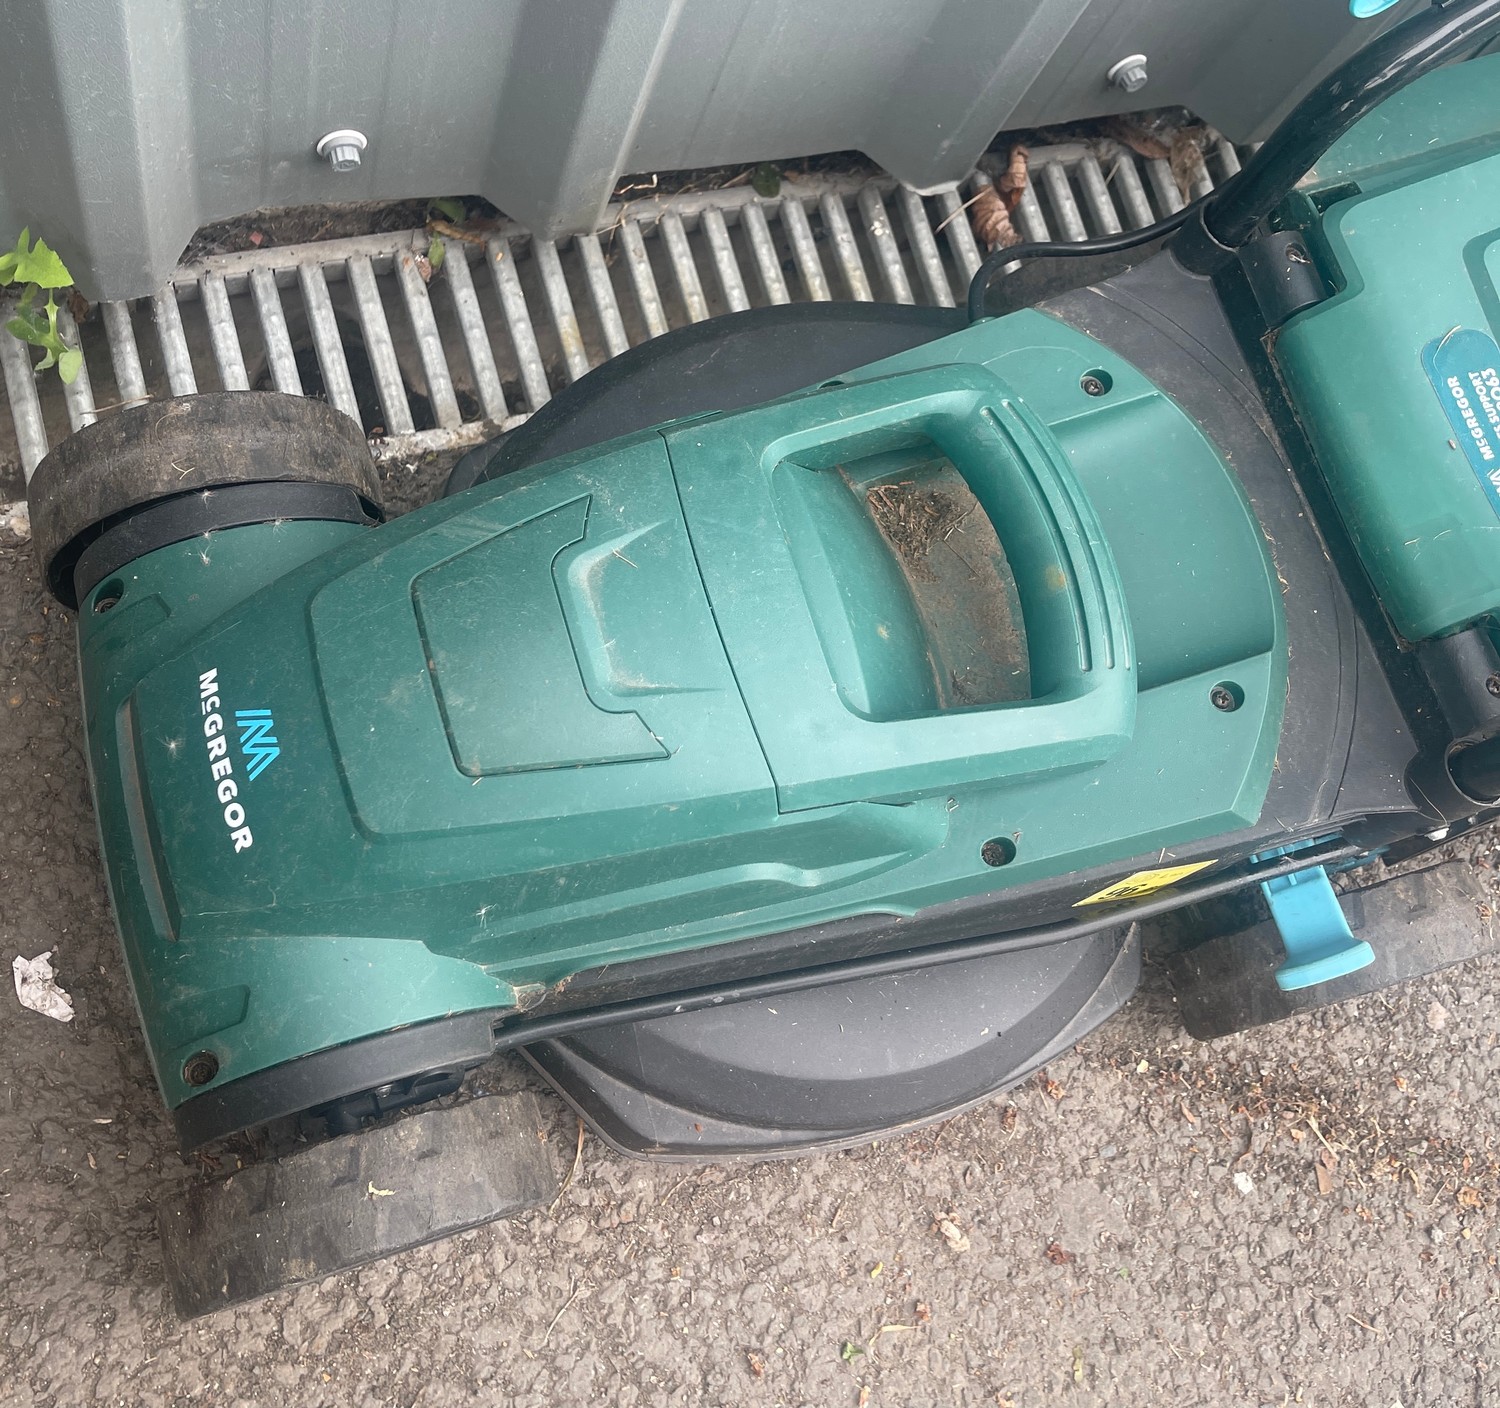 Mcgregor lawn mower with grass box working order - Image 2 of 2